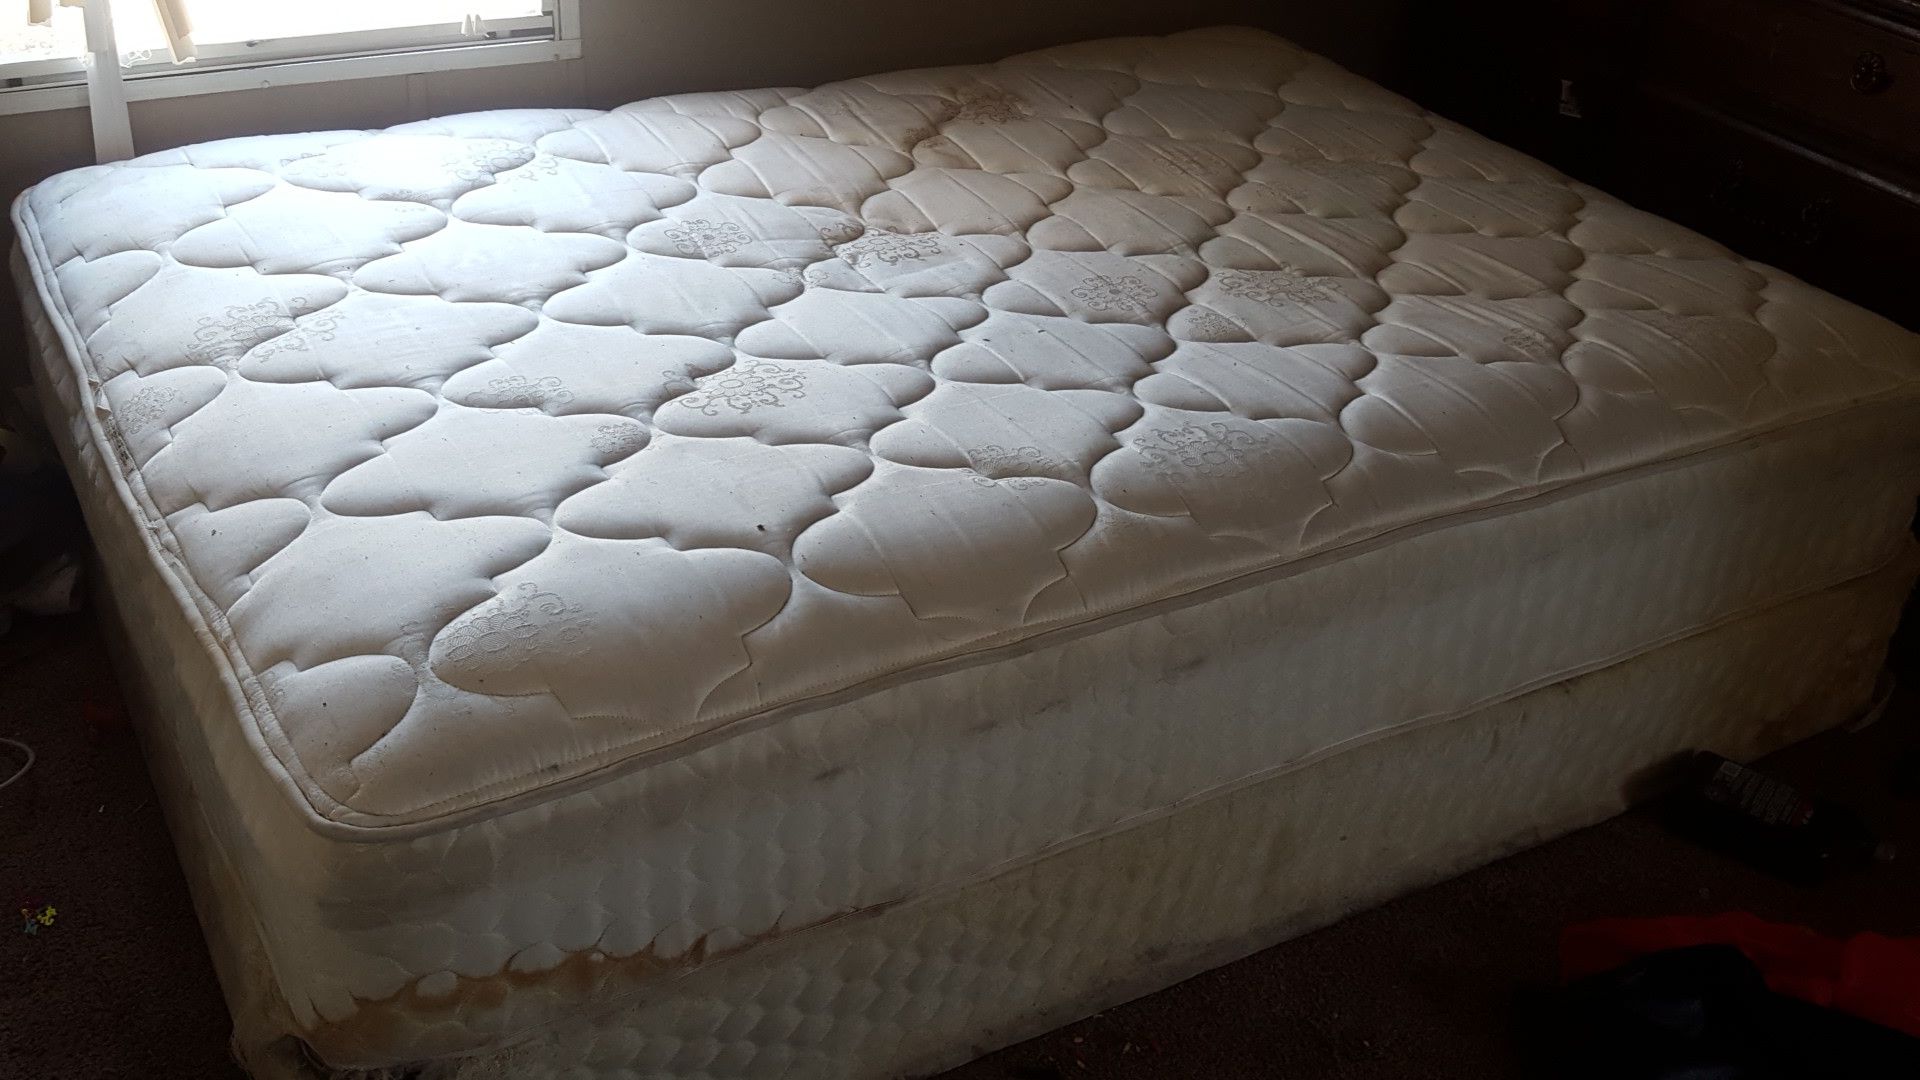 Full size mattress and box spring.